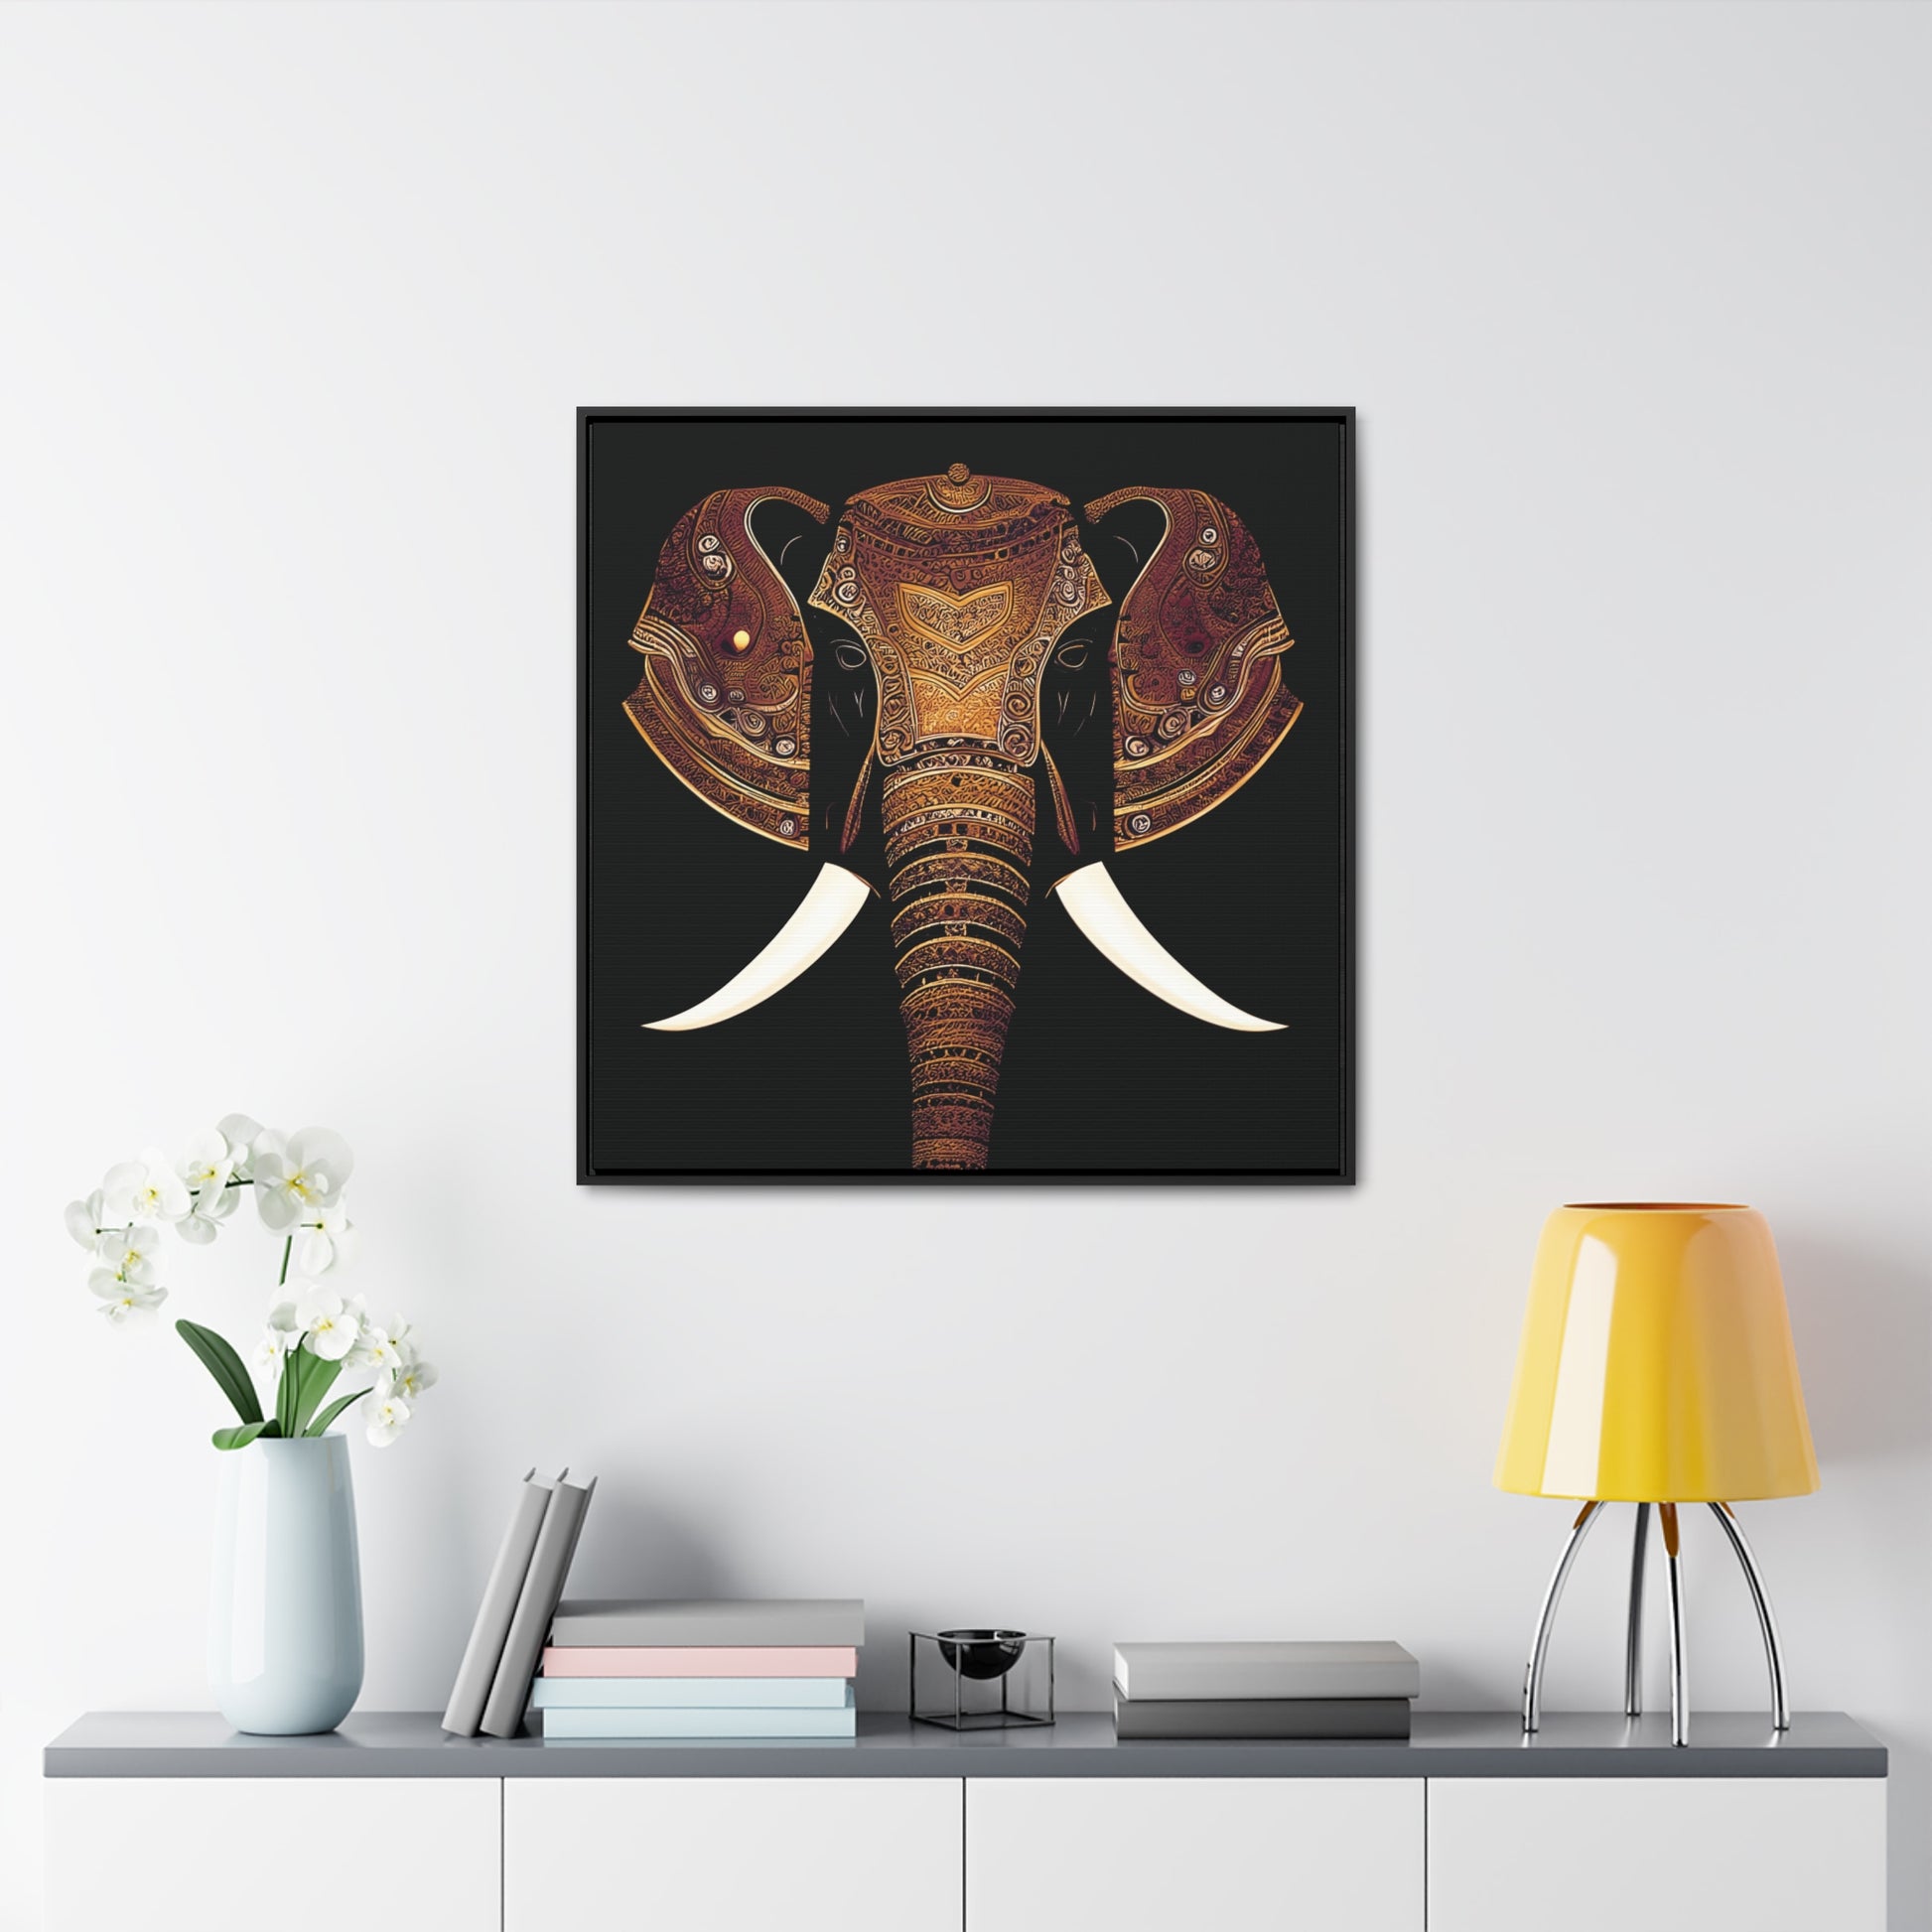 Indian Elephant Head With Parade Colors on Black Background Print on Canvas in a Floating Frame 30x30